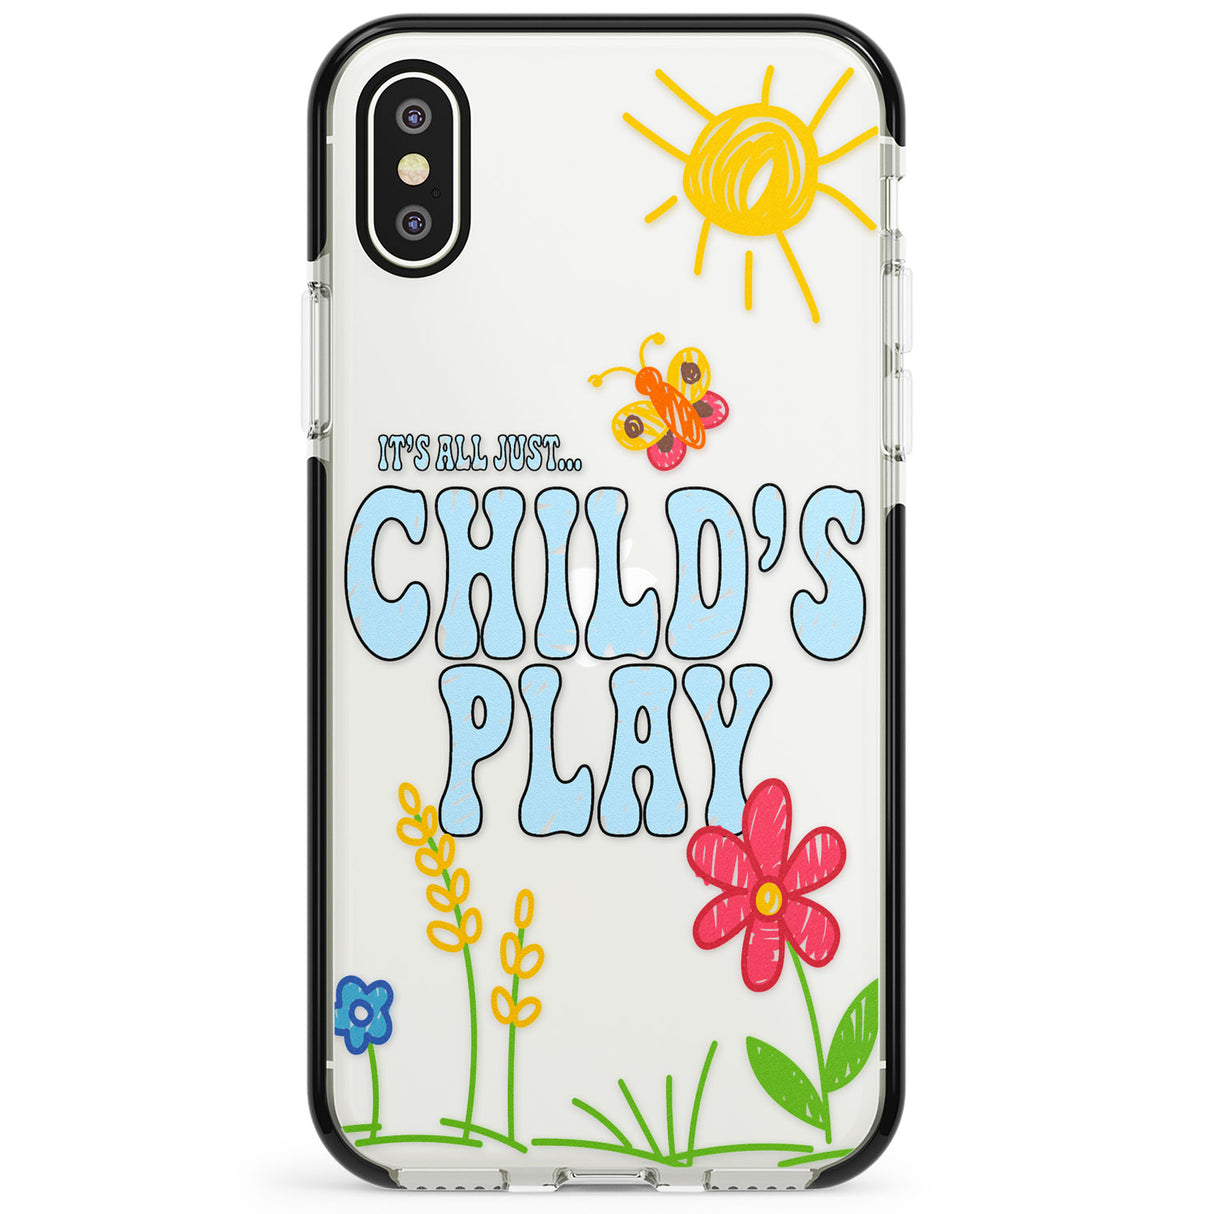 Child's Play Phone Case for iPhone X XS Max XR